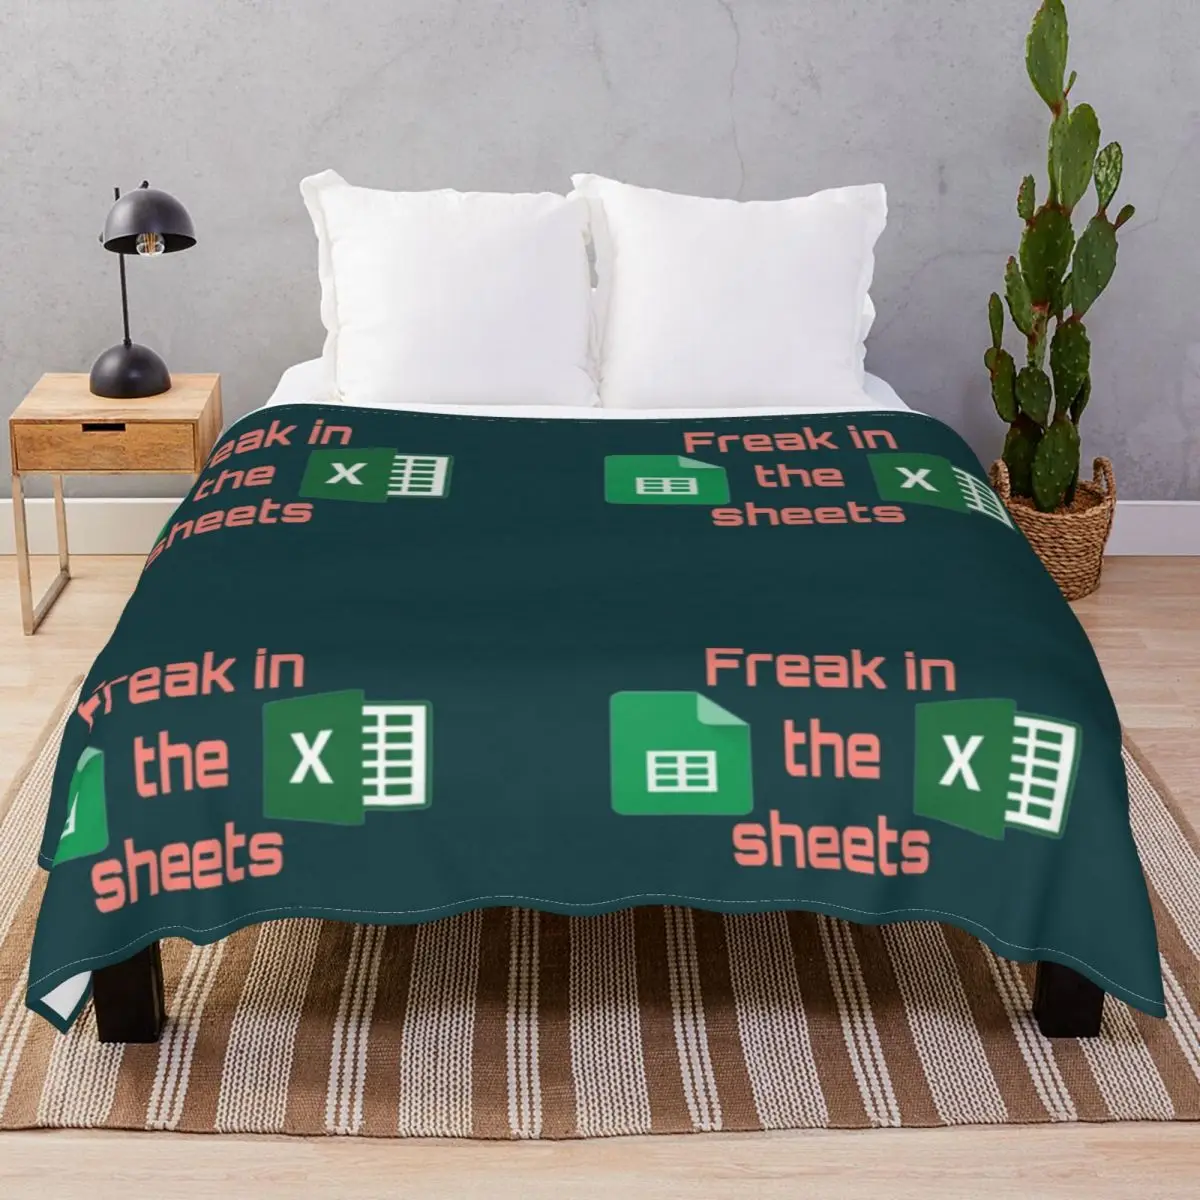 Freak In The Sheets Excel Vs Sheets Blankets Flannel Plush Decoration Fluffy Unisex Throw Blanket for Bedding Sofa Camp Cinema